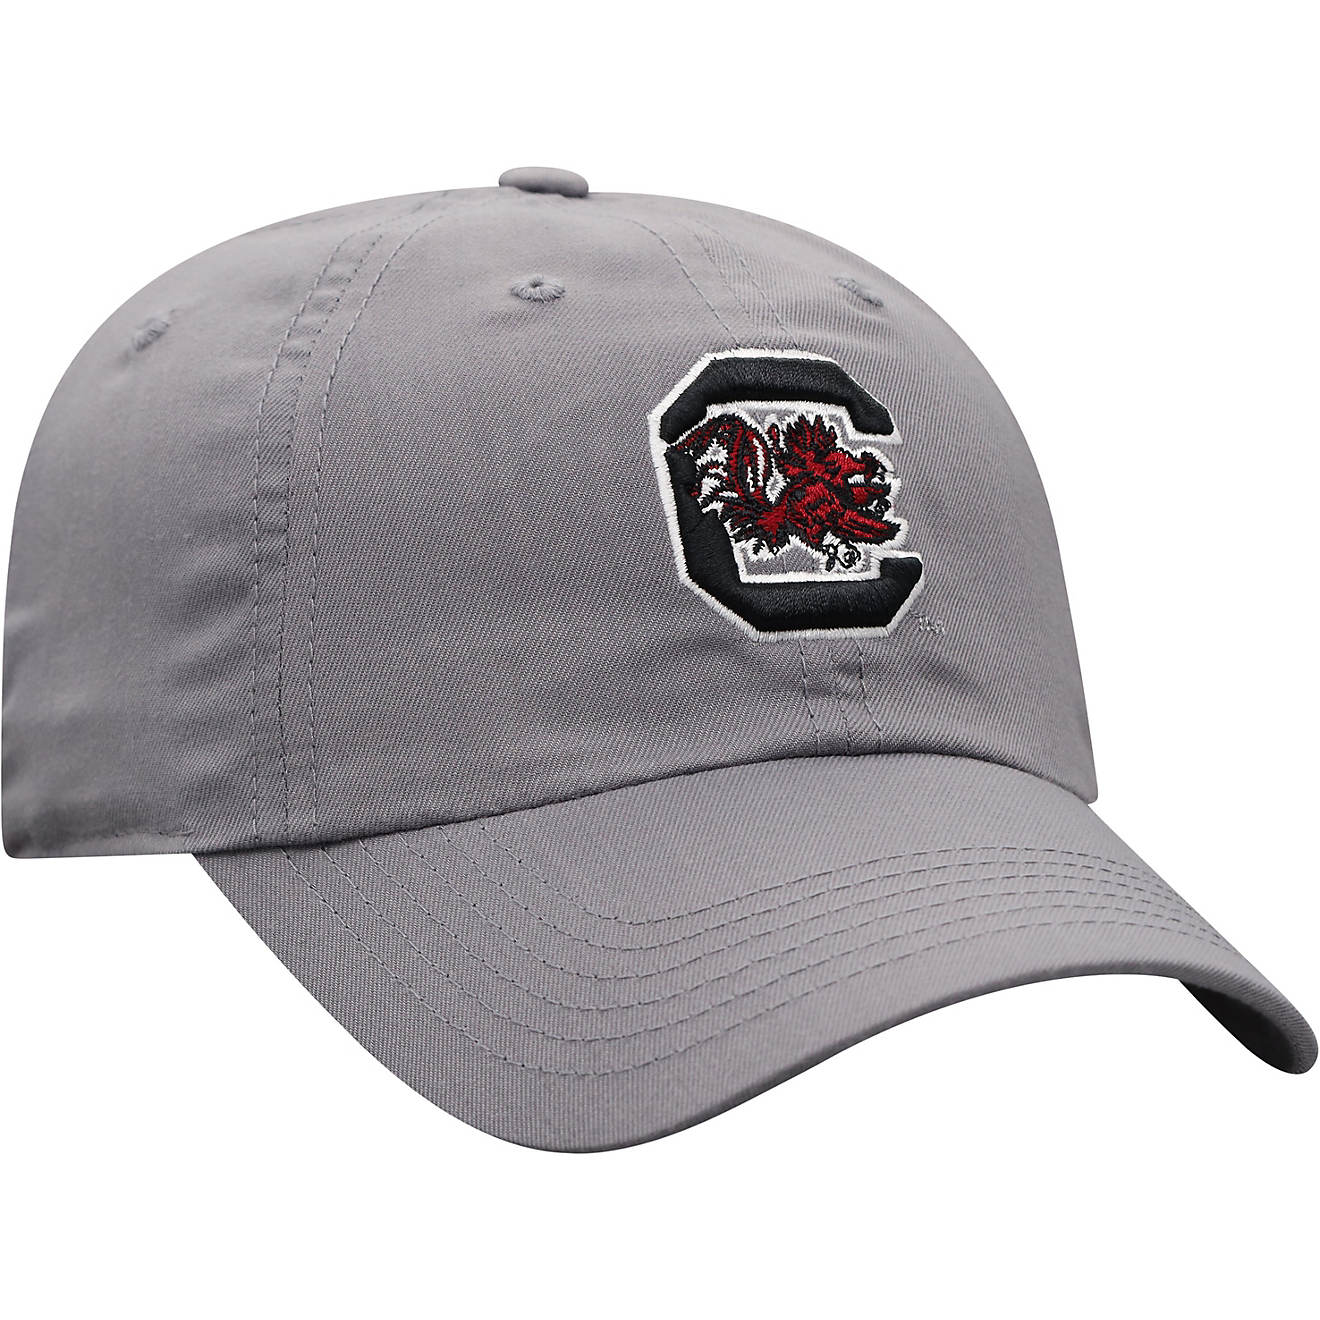 Top of the World Men's University of South Carolina Staple Cap                                                                   - view number 1